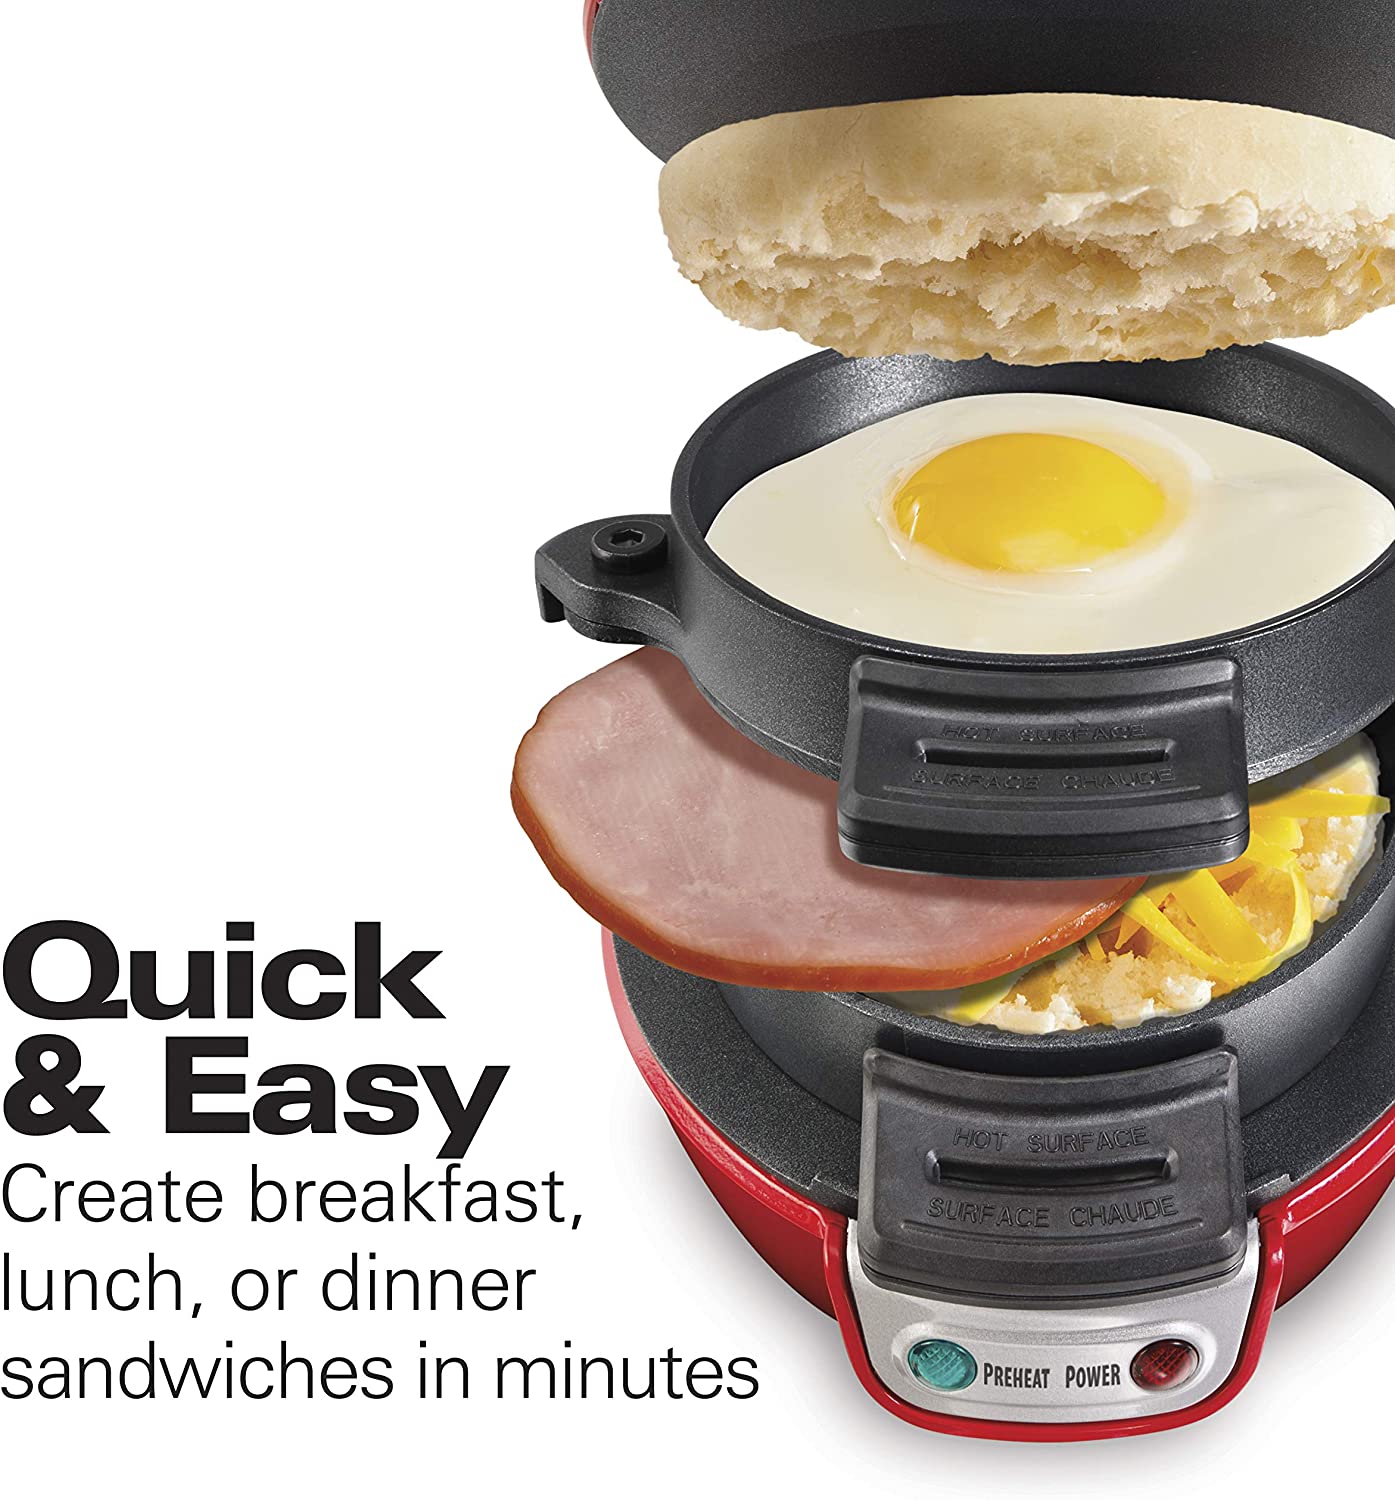  Hamilton Beach Breakfast Sandwich Maker with Egg Cooker Ring,  Customize Ingredients, Perfect for English Muffins, Croissants, Mini  Waffles, Perfect White Elephant Gifts, Mint (25482) : Grocery & Gourmet Food